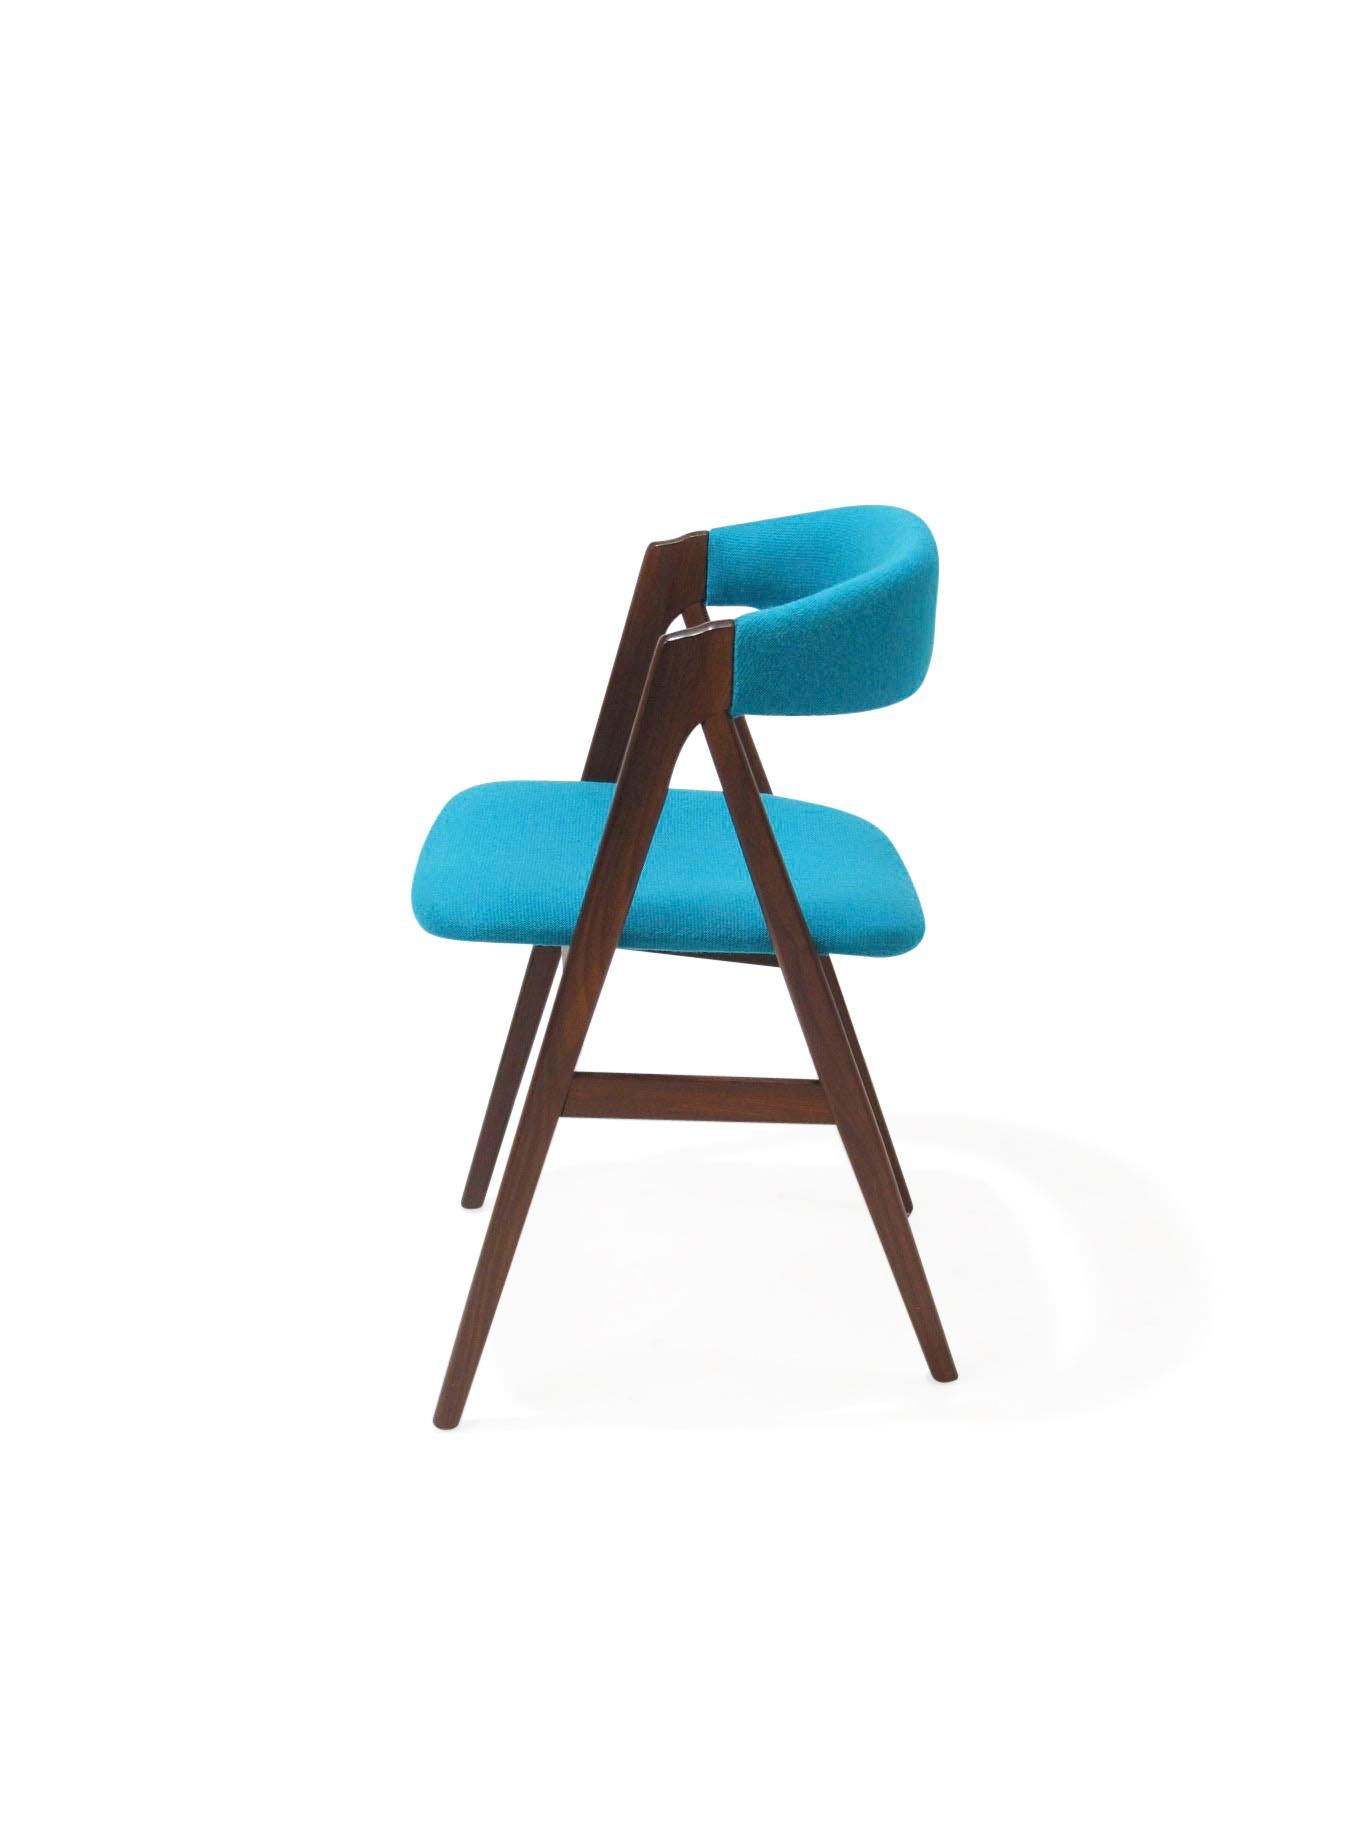 20th Century A-Frame Danish Dining Chairs in Turquoise Wool